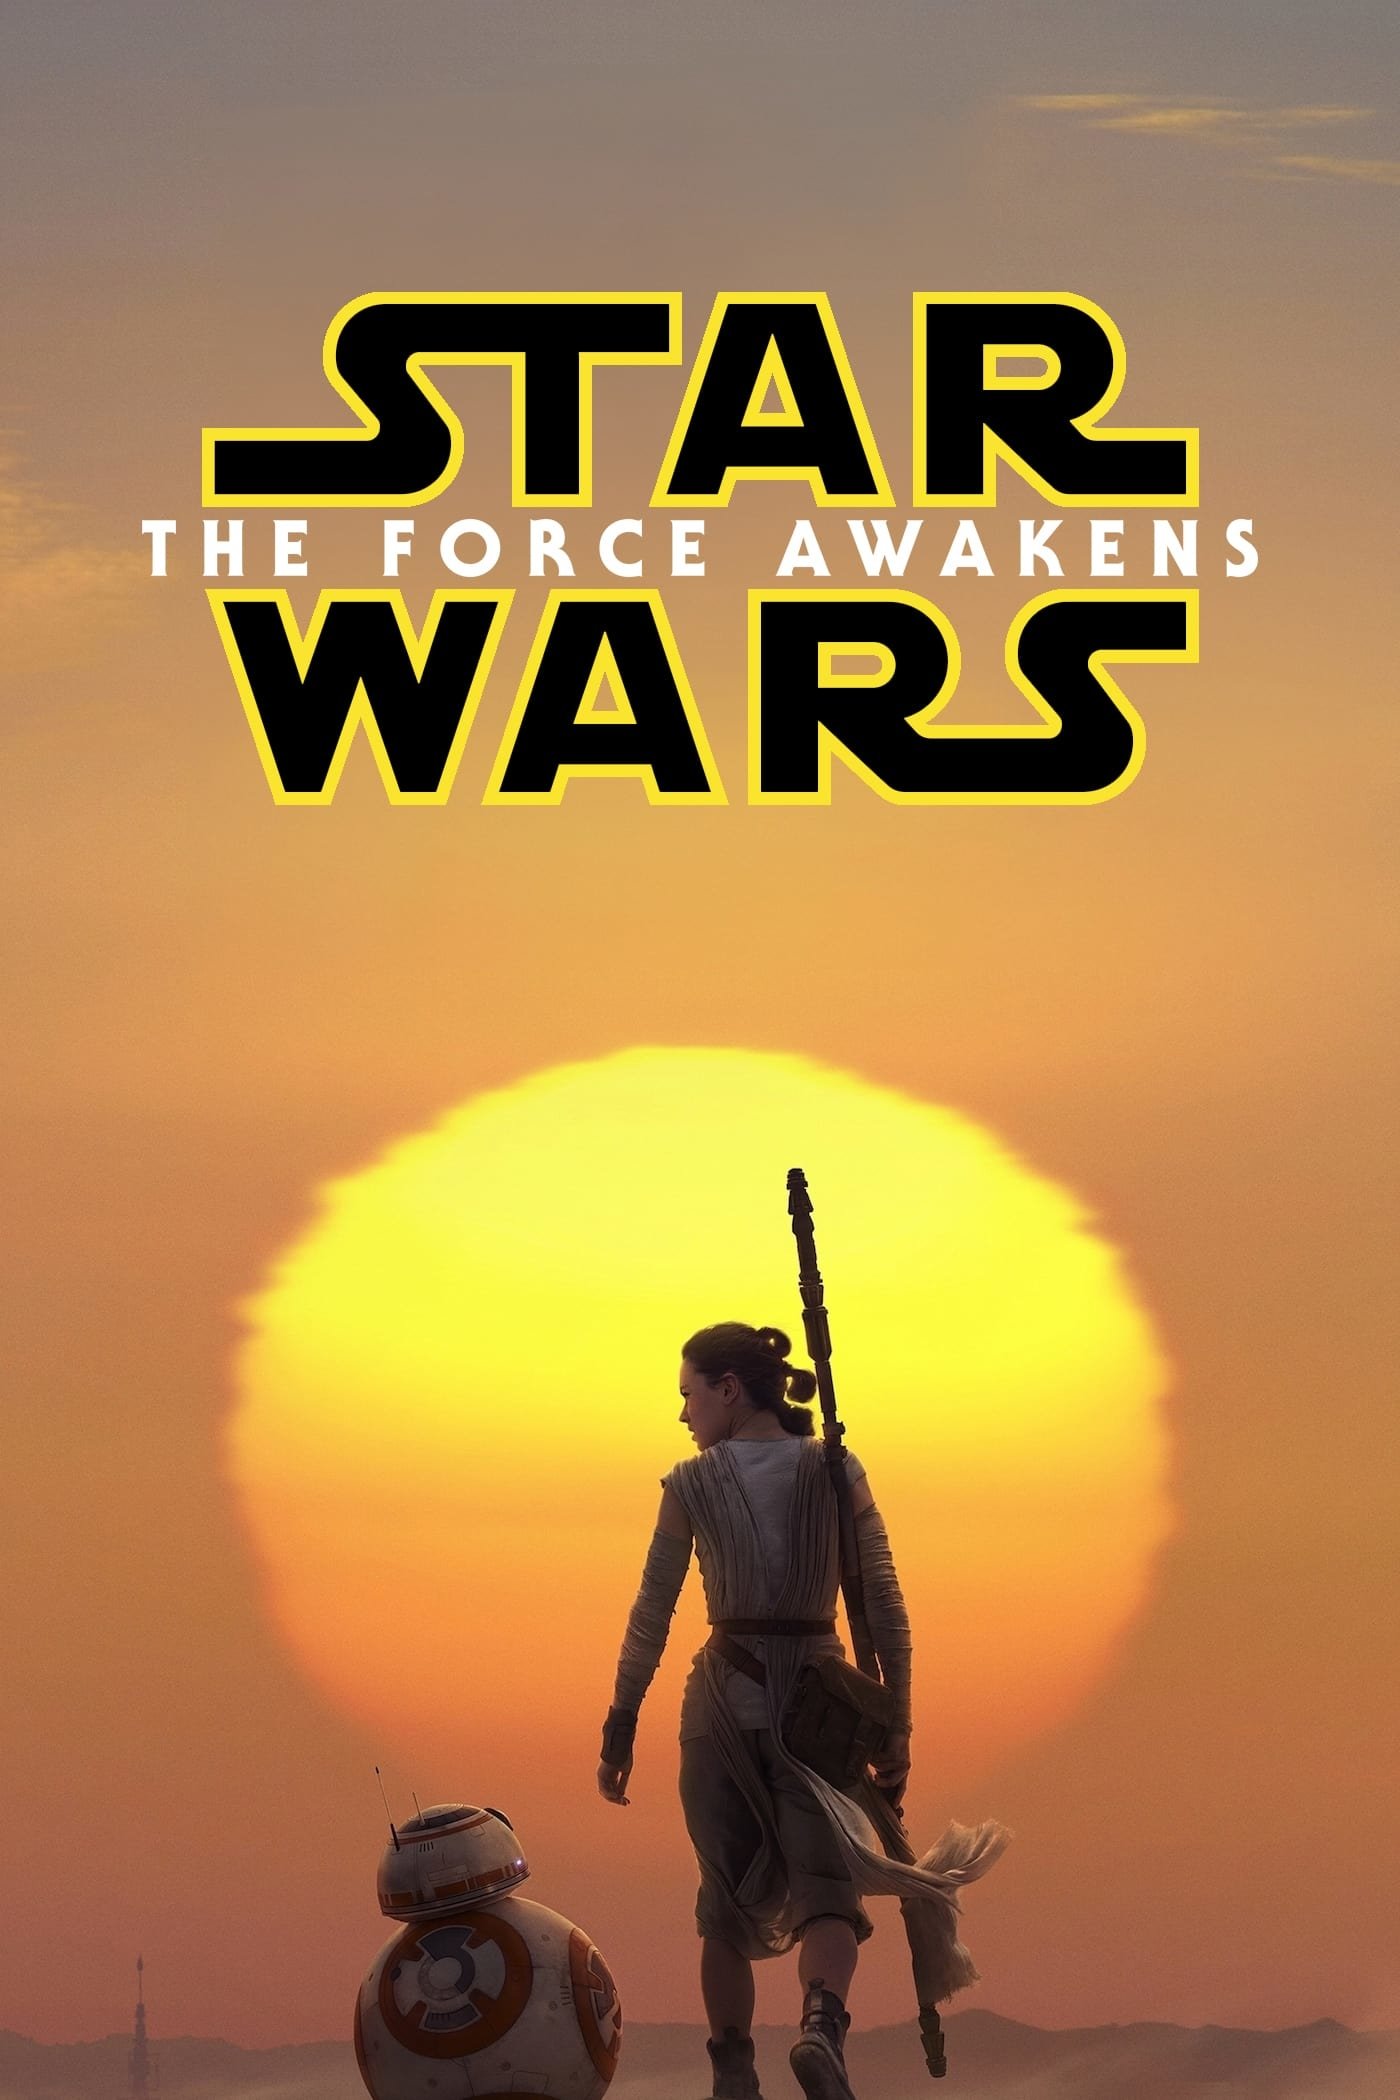 Star Wars Ep. VII: The Force Awakens instal the new